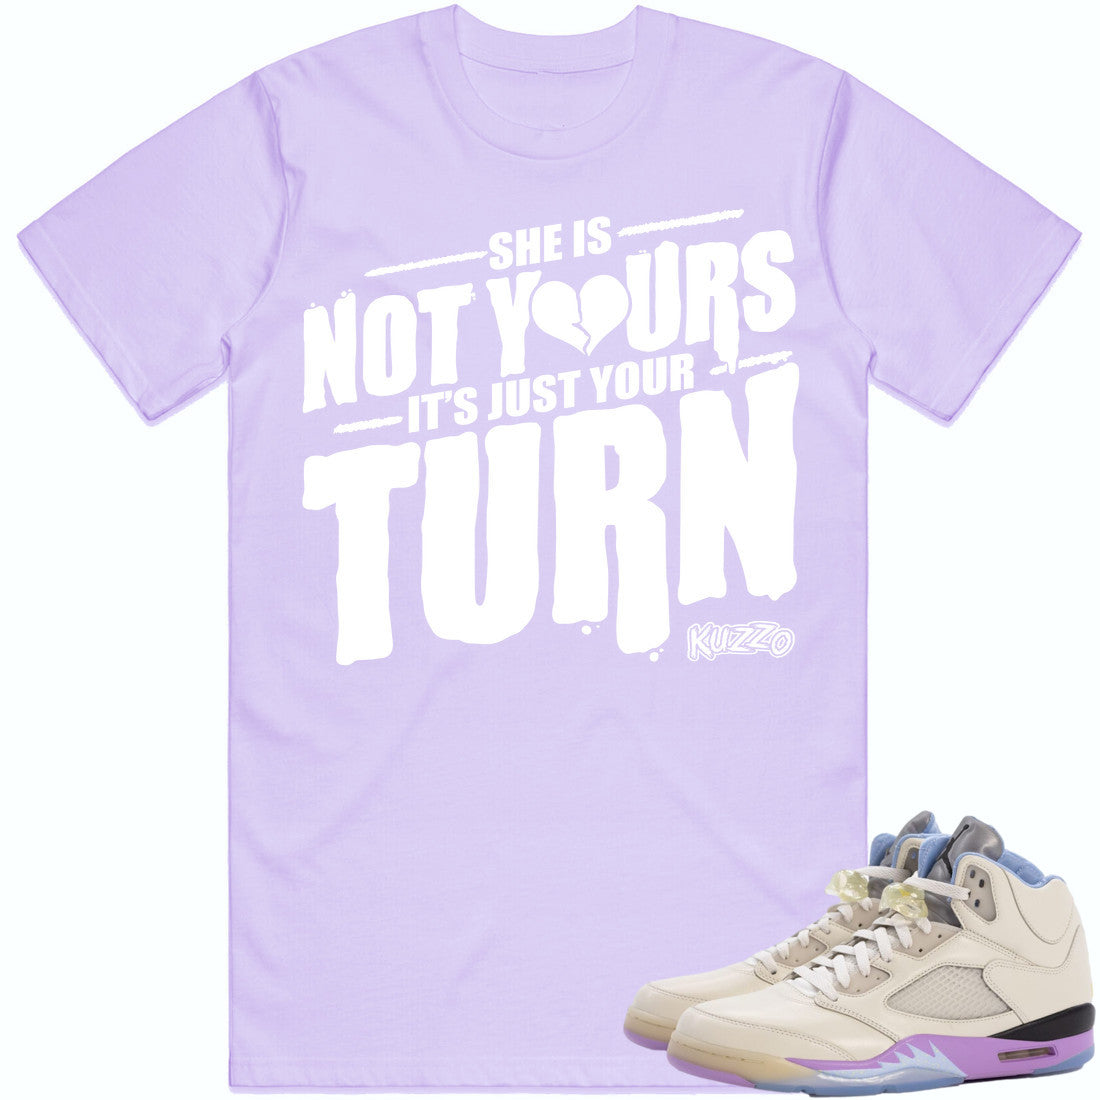 Sail Violet 5s Shirts to Match - Jordan 5 Sneaker Tees - Not Yours